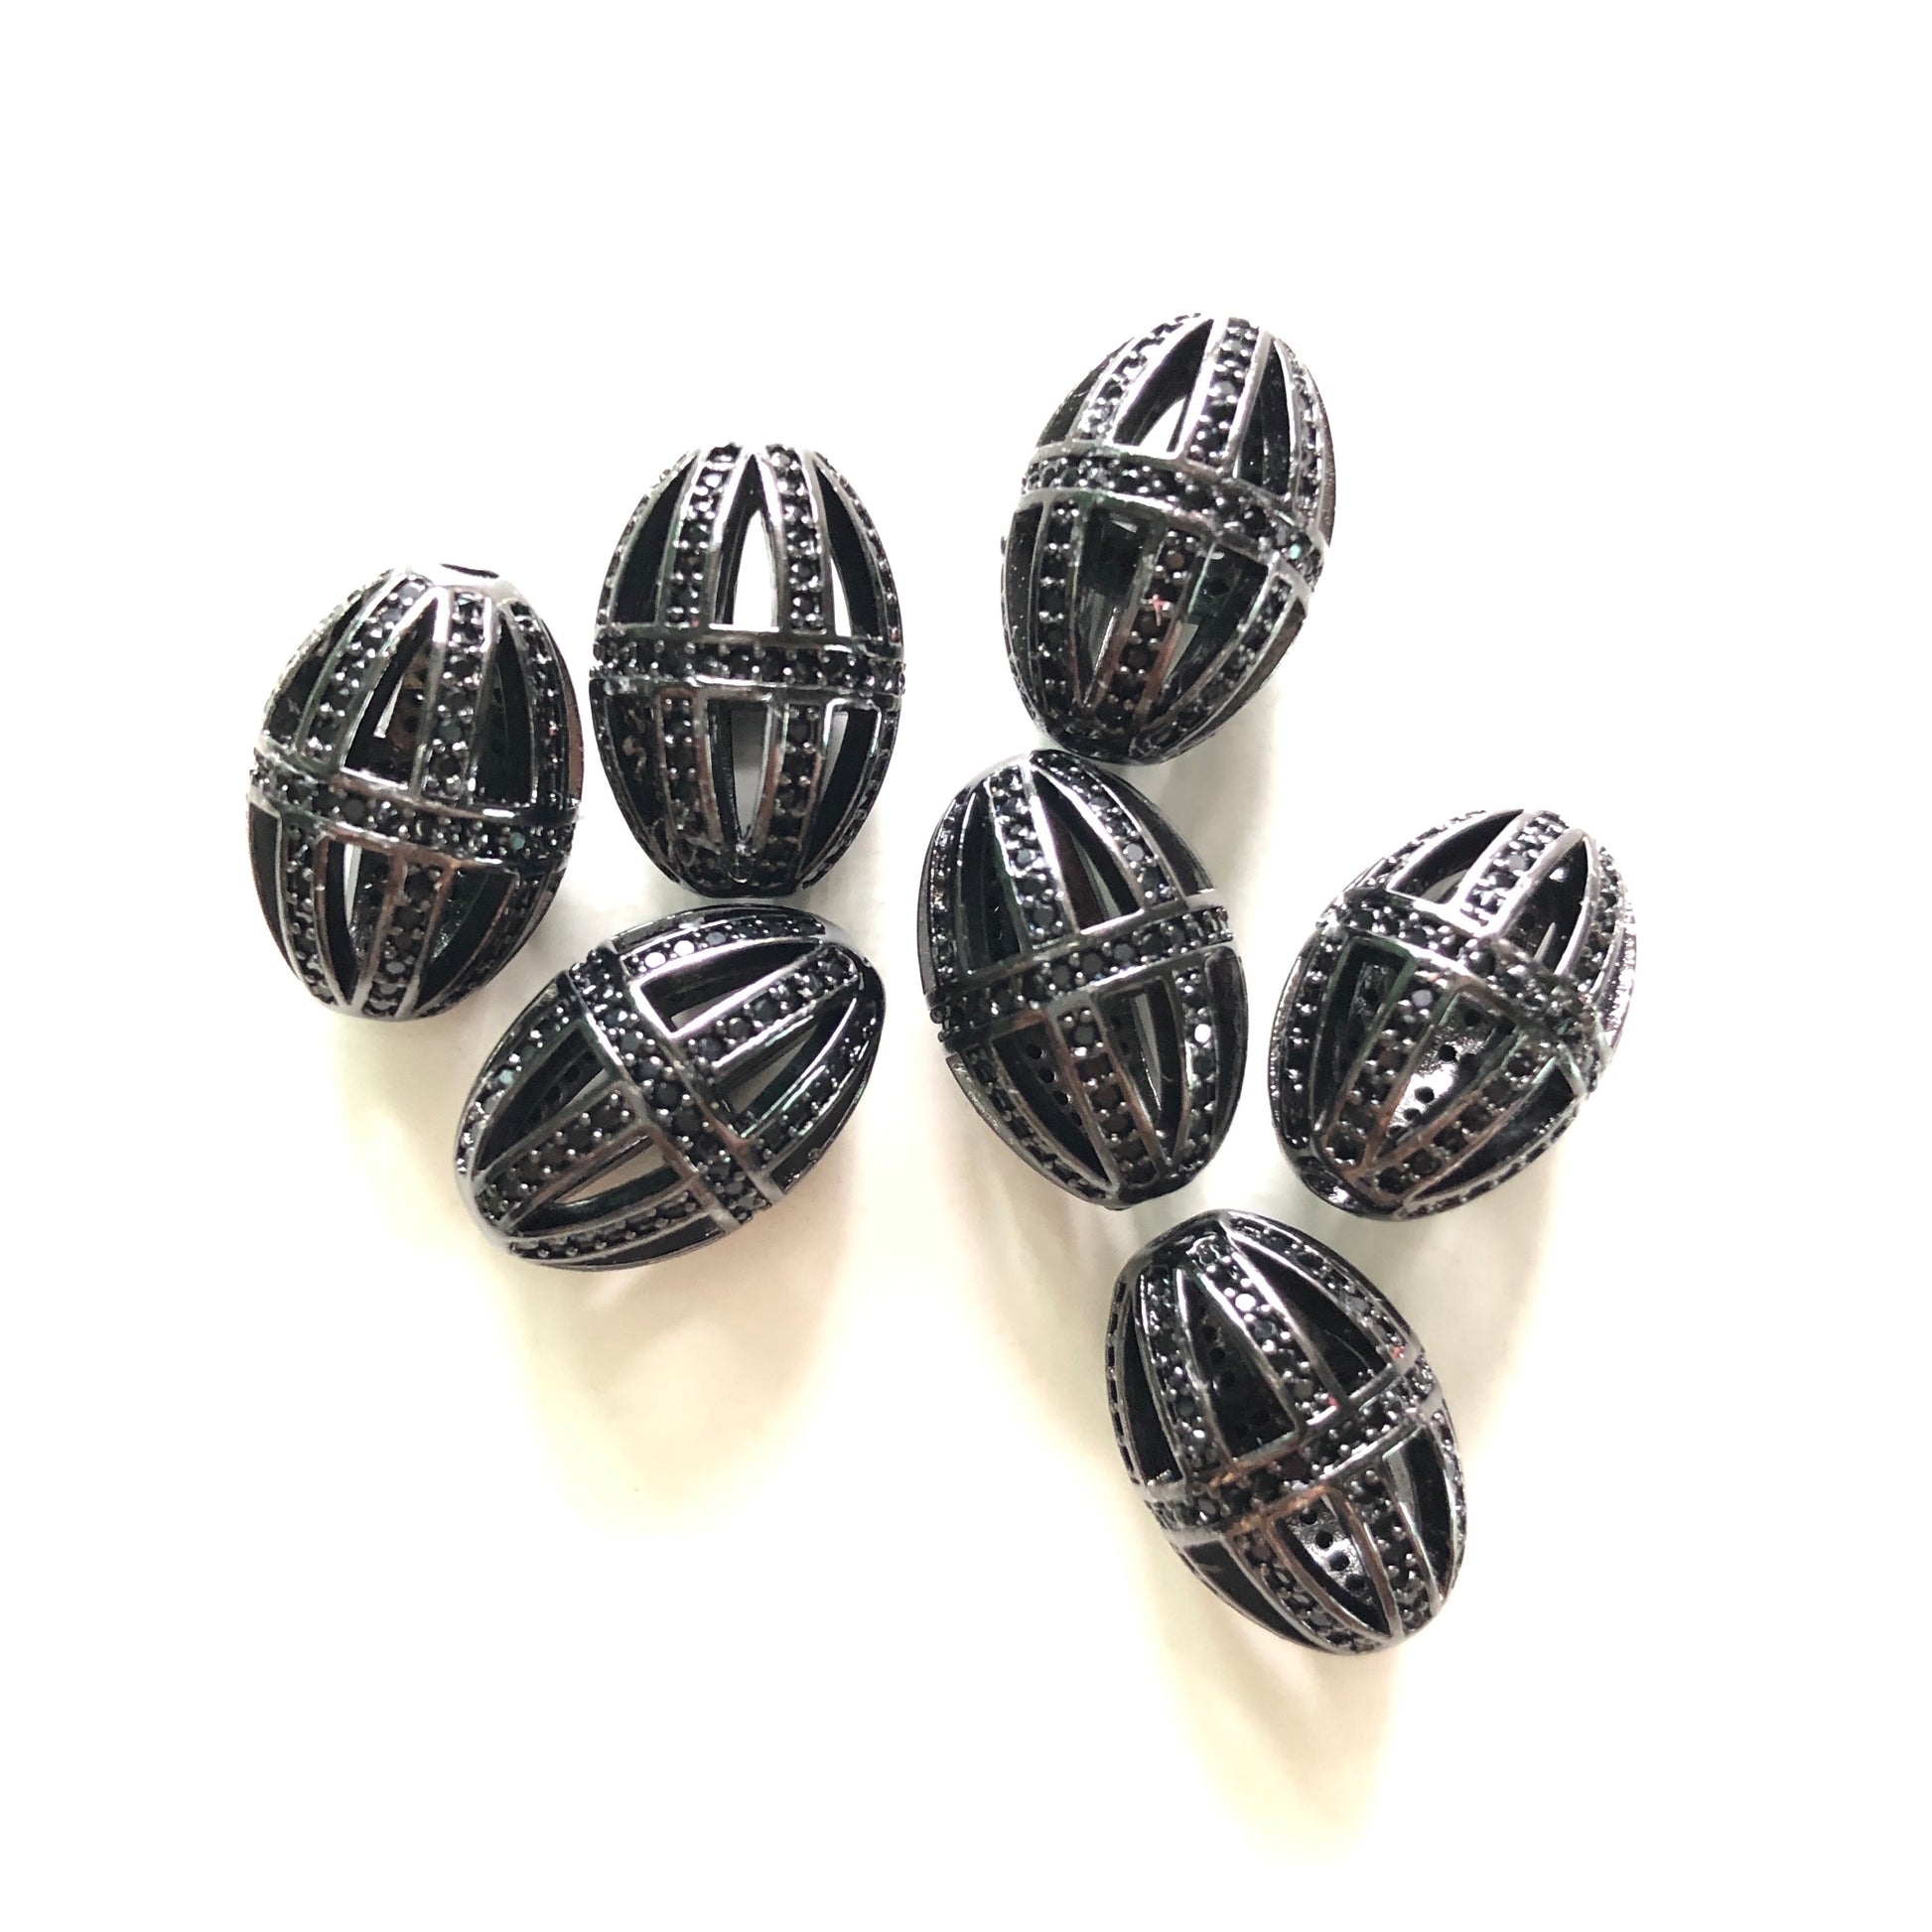 10pcs/lot 16.5*11.5mm CZ Paved Hollow Olive Beads Spacers Black CZ Paved Spacers Oval Spacers Charms Beads Beyond